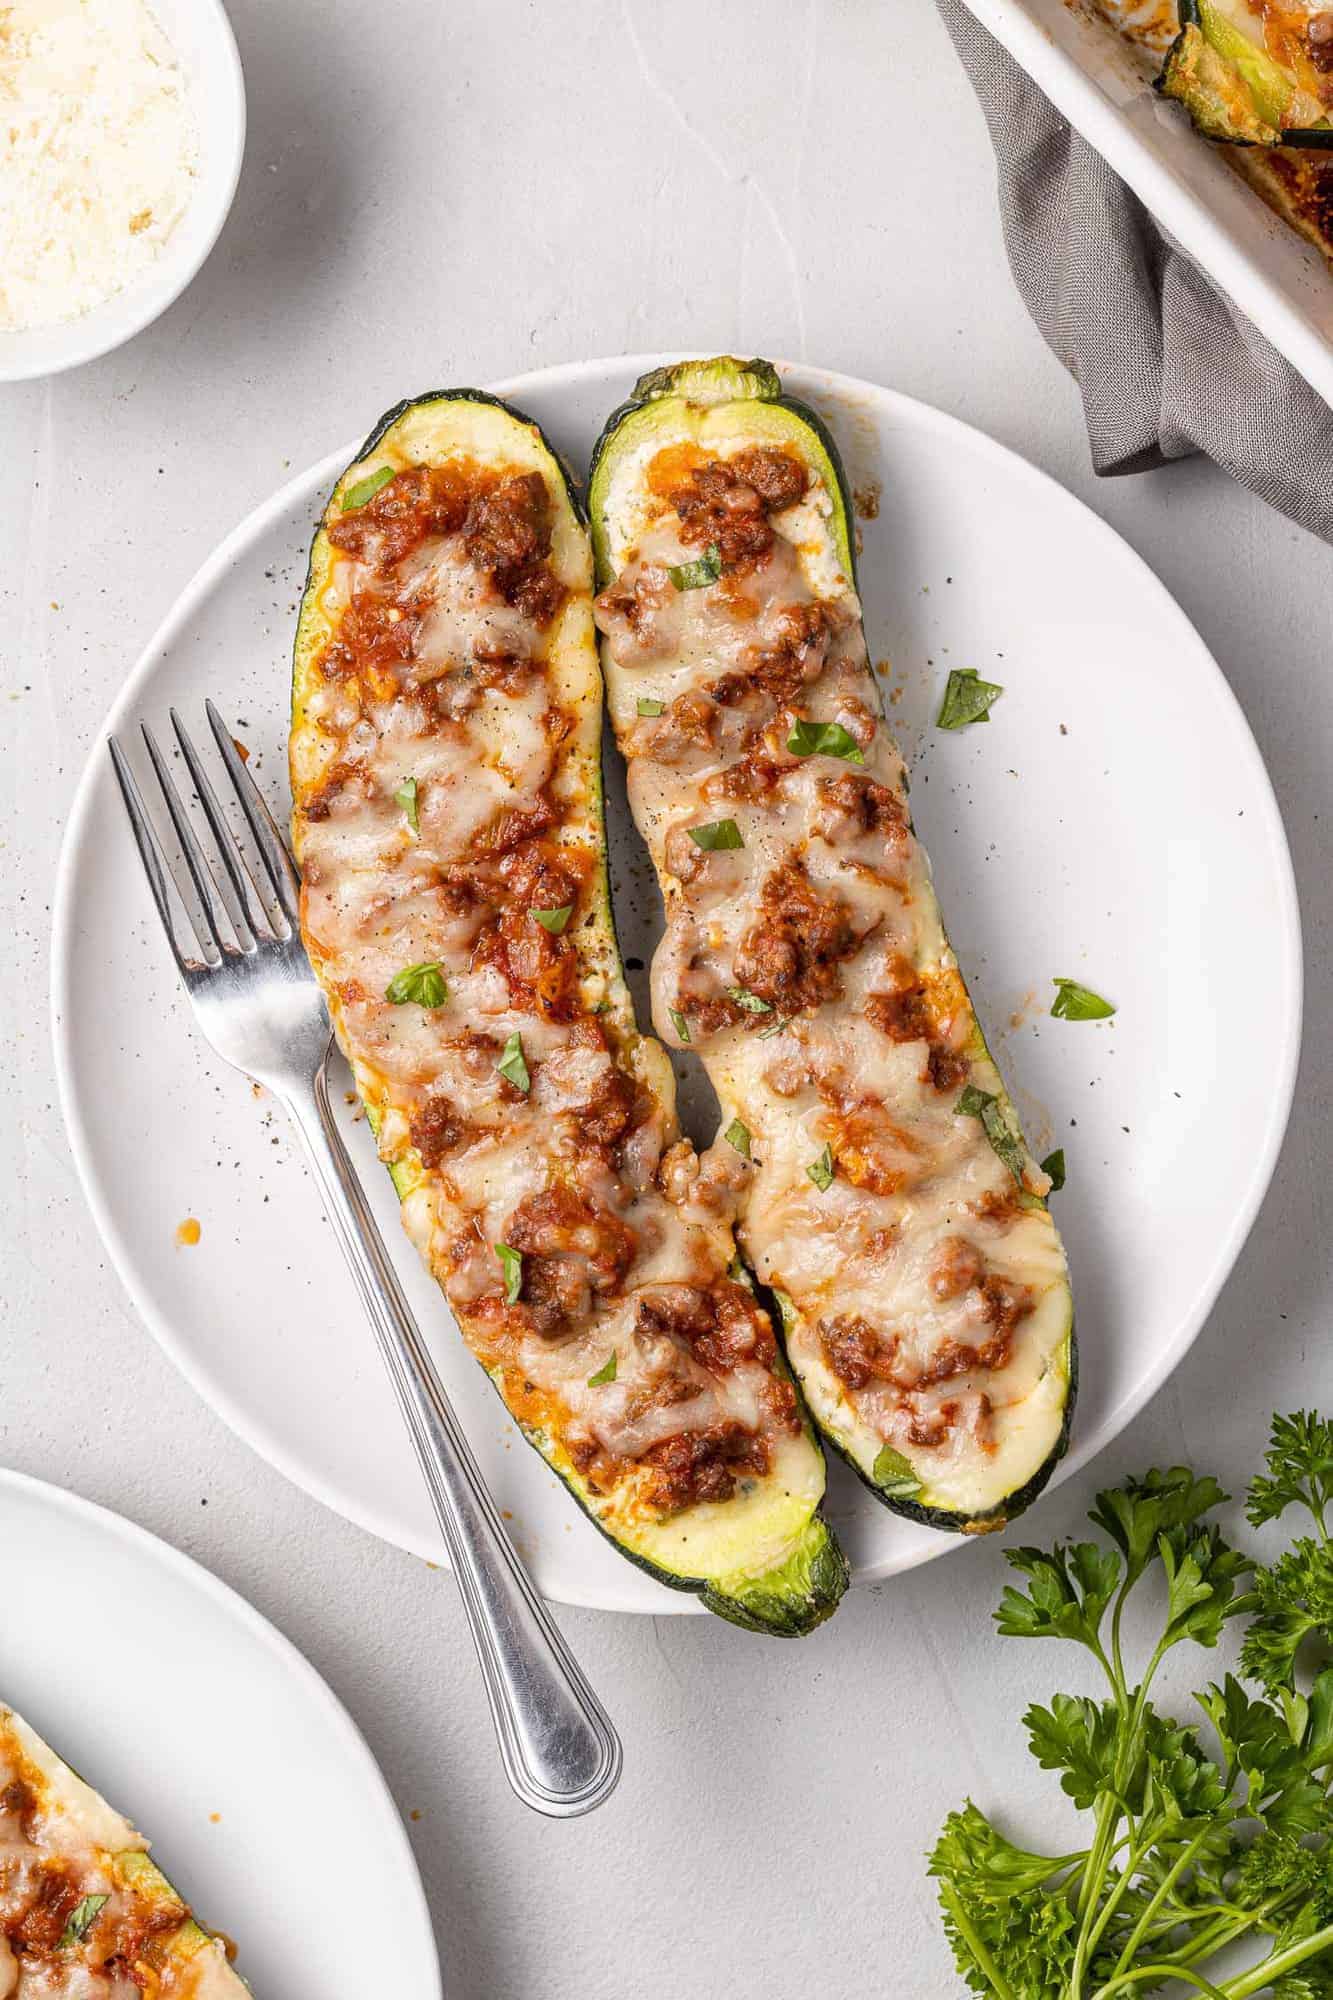 Two lasagna boats on a plate with a fork.